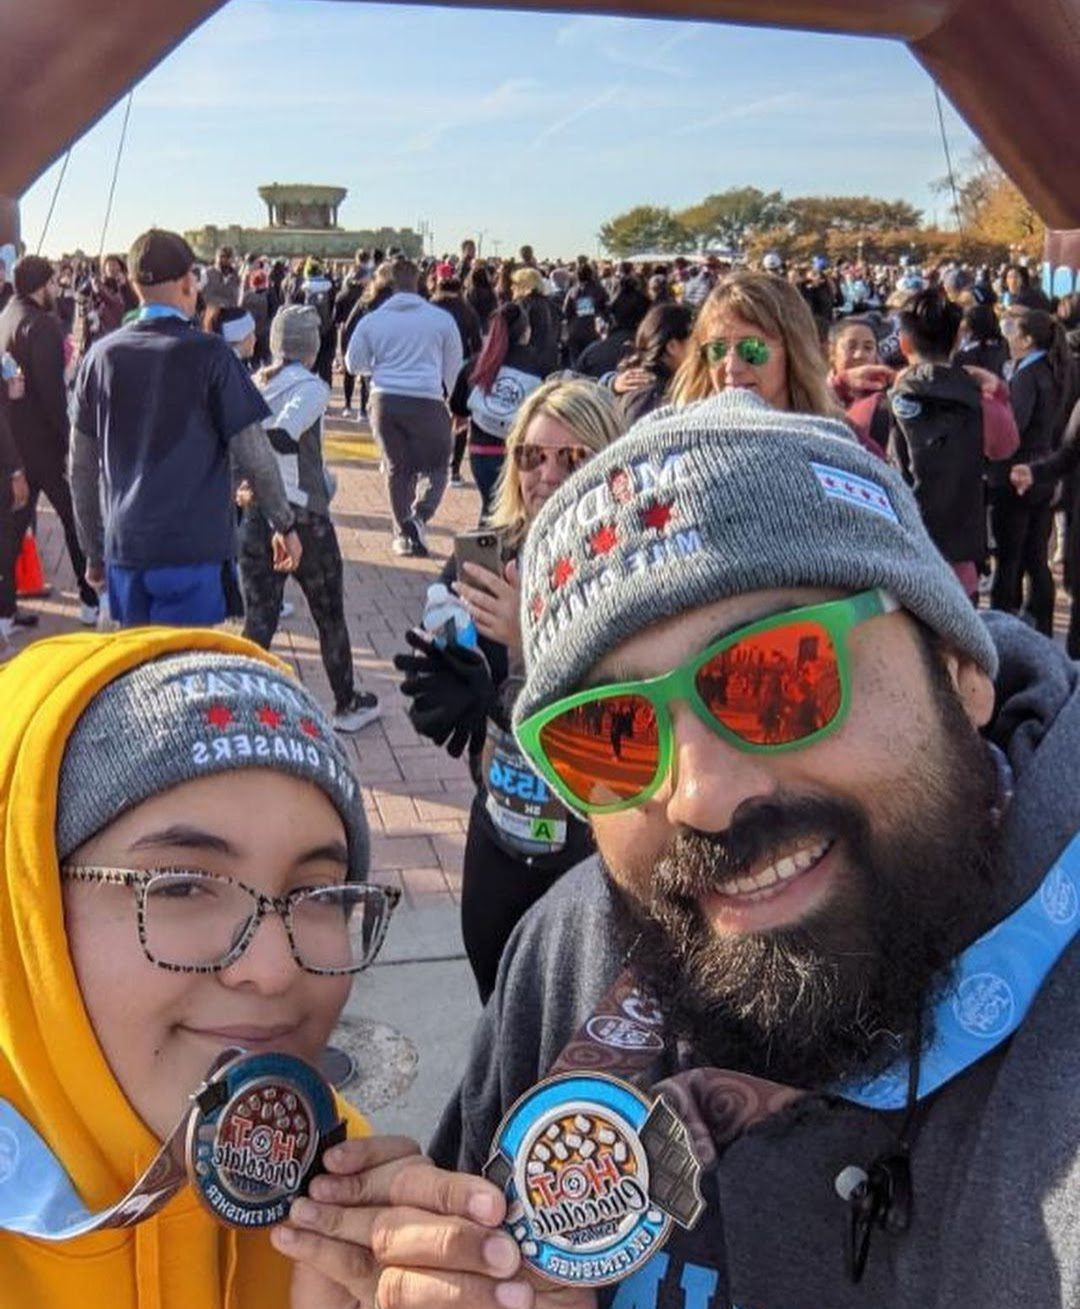 Photo shows a selfie of Mia and her dad holding medals for the Hot Chocolate 5K run in 2021. They are wearing matching gray beanies that say "Midway Mile Chasers" on them. Behind them is a crowd of other people at the race.